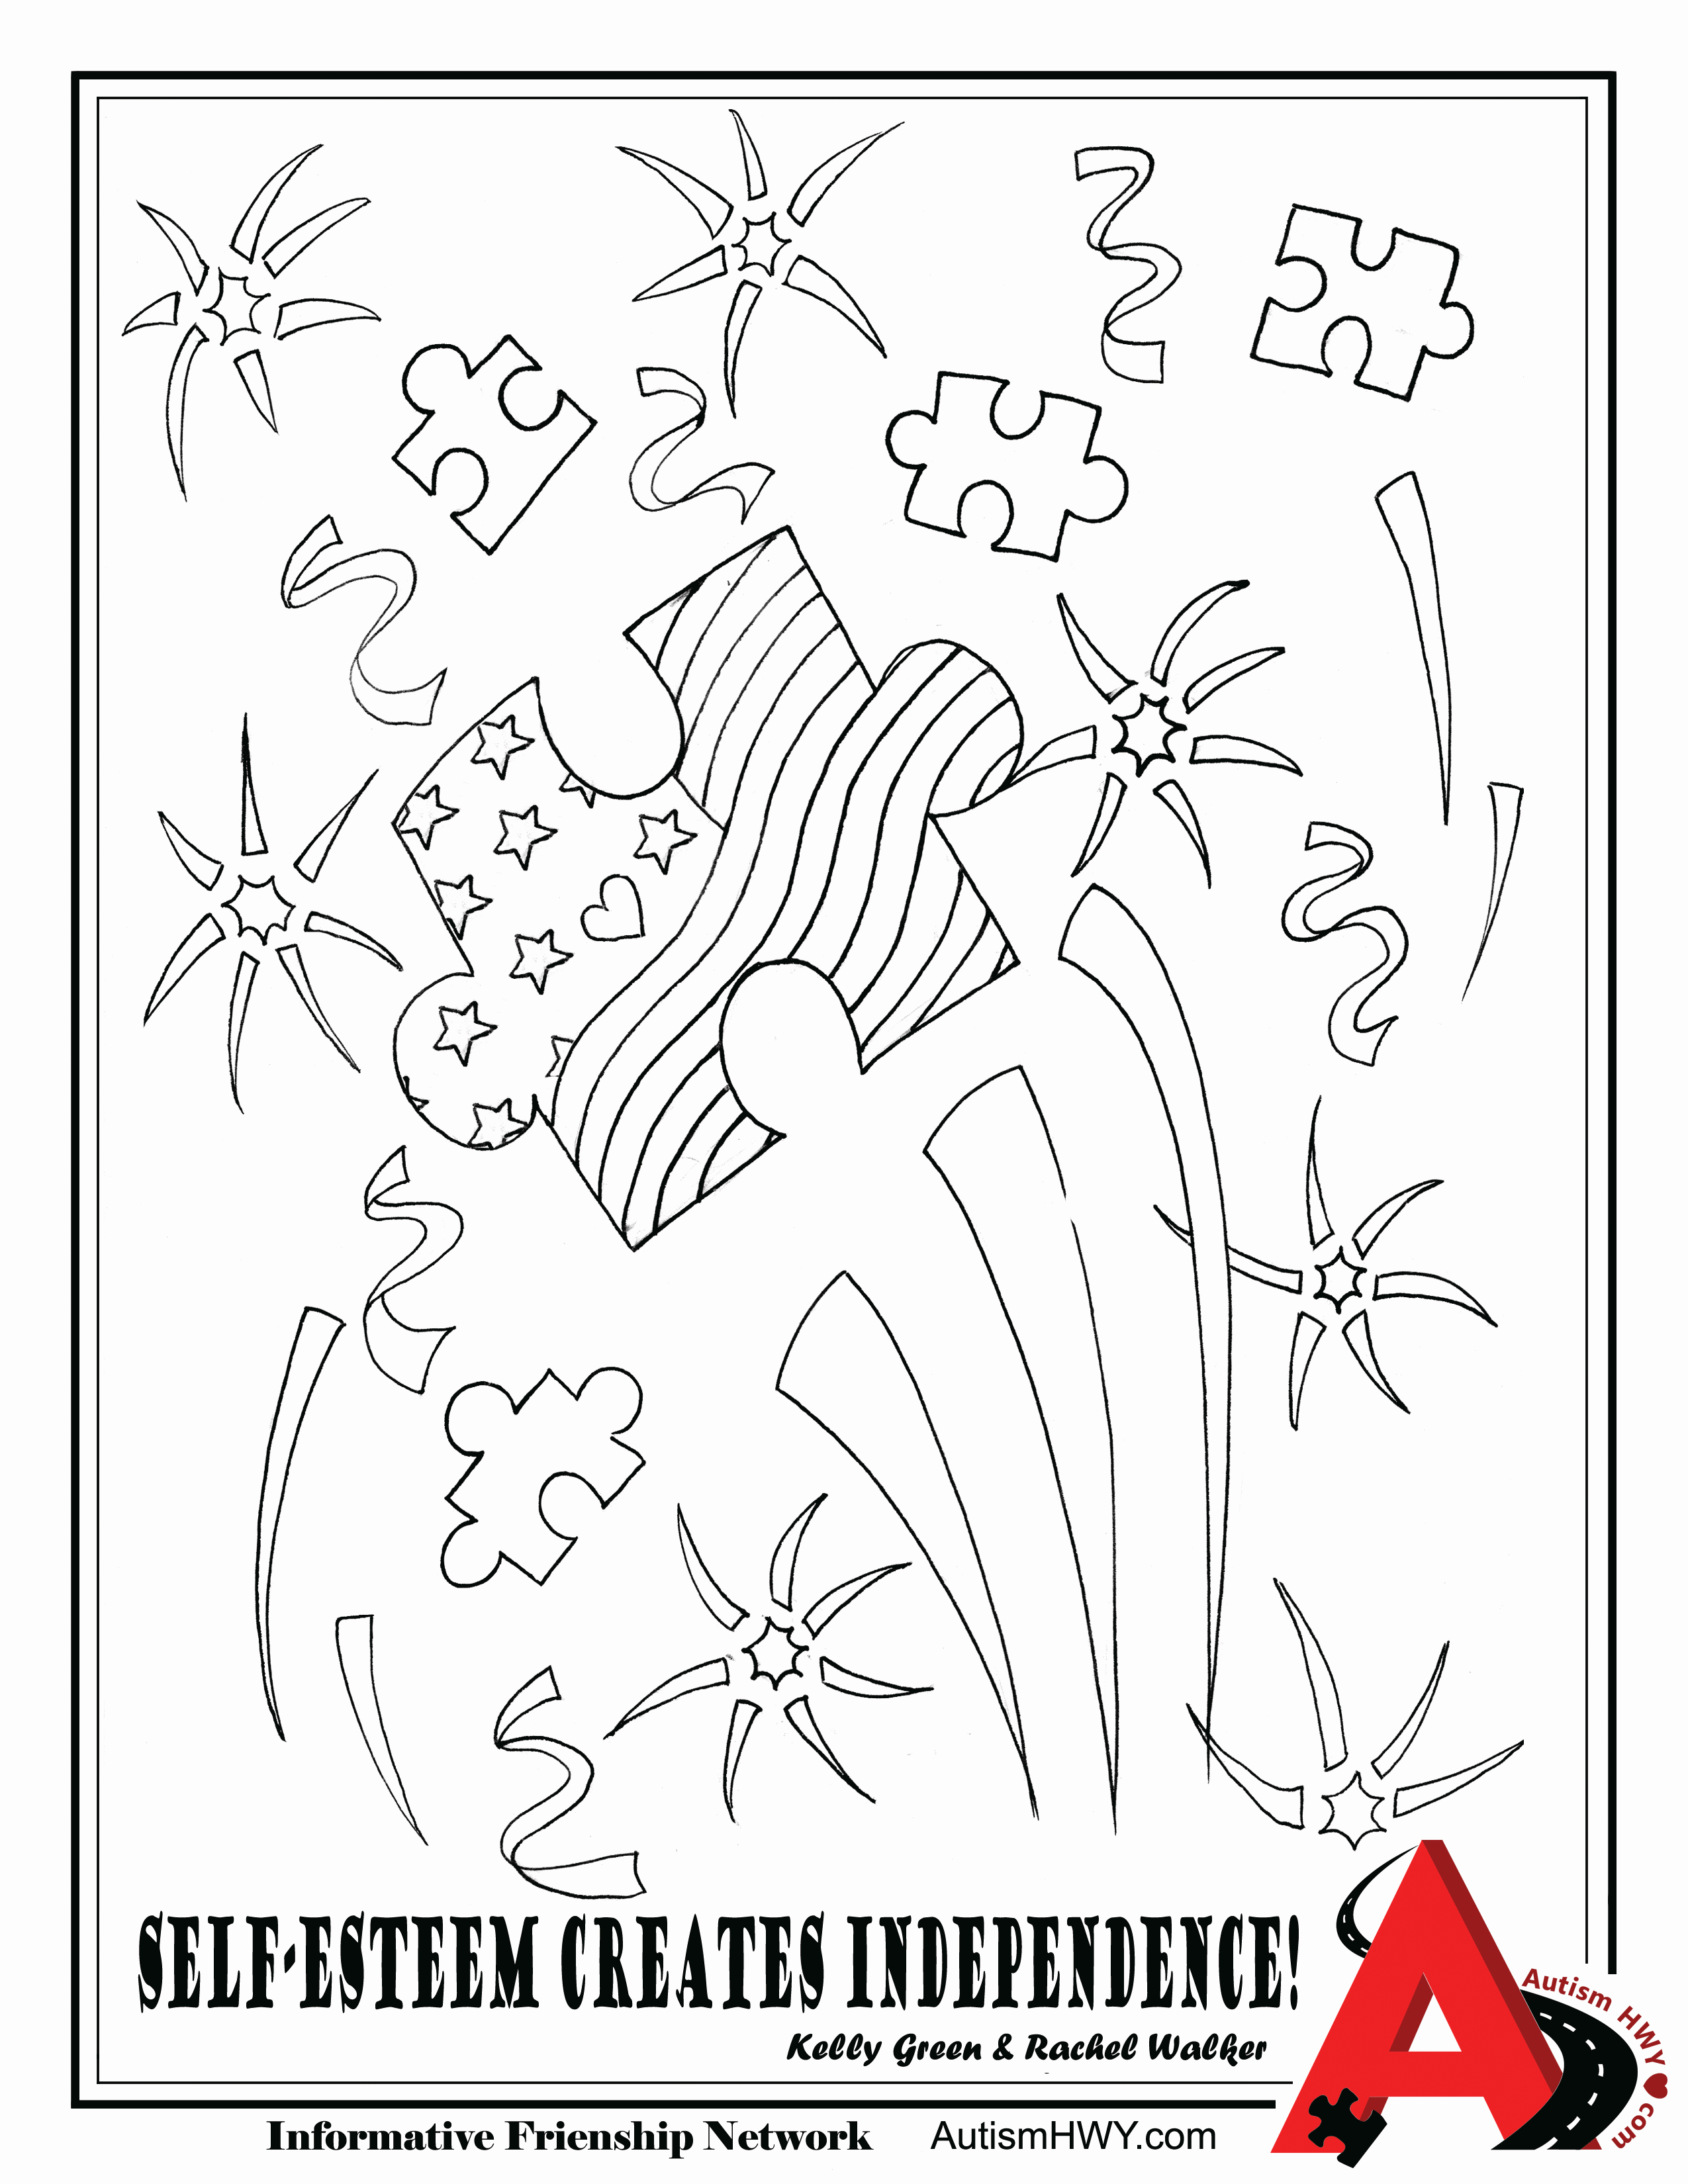 Autism Awareness Printable Coloring Pages - Coloring Page